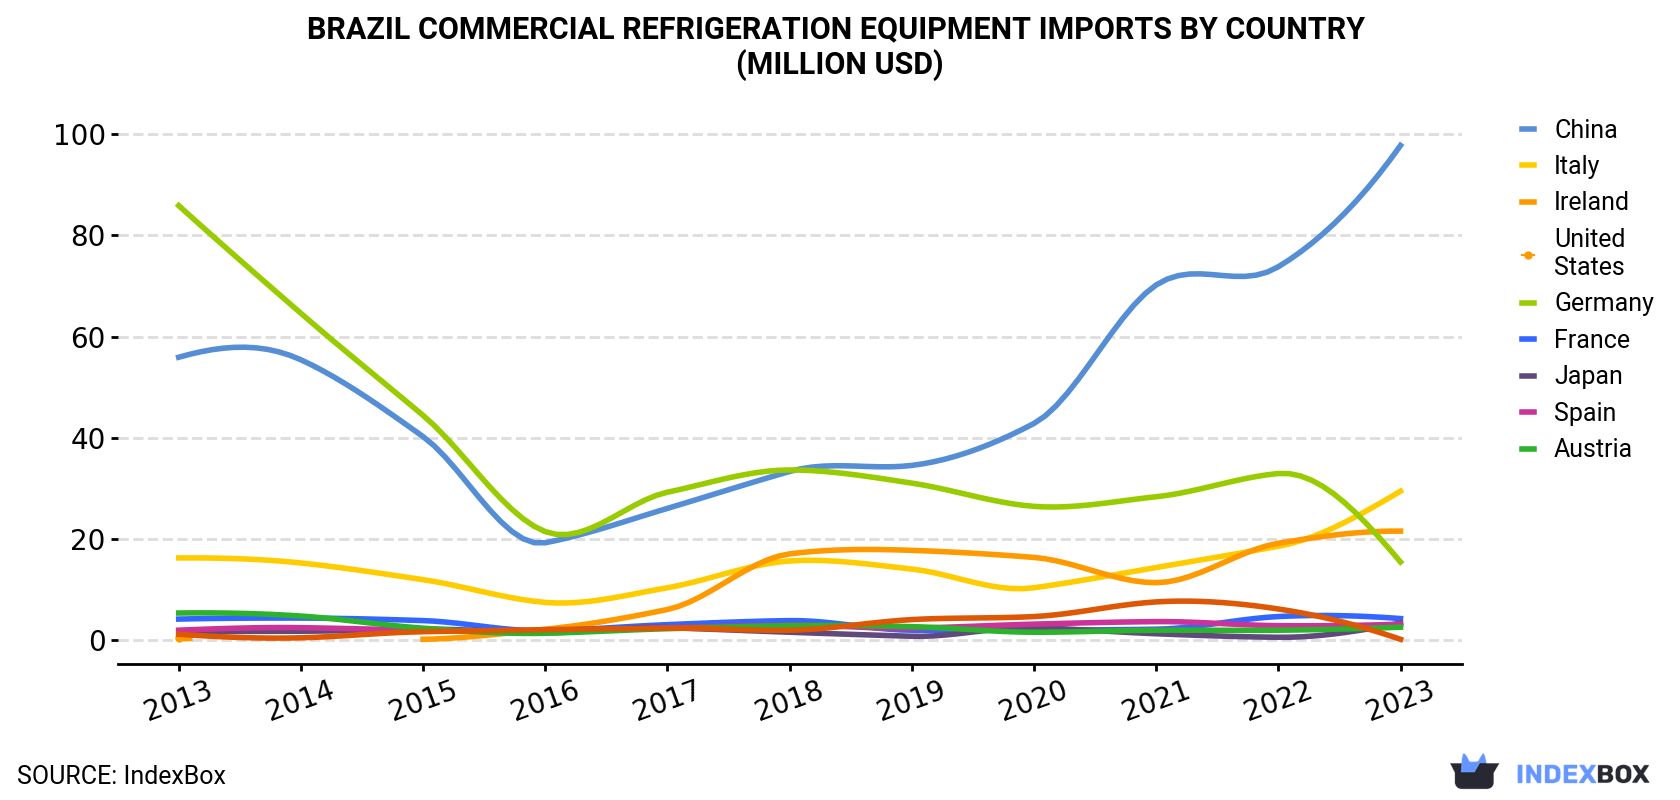 Brazil Commercial Refrigeration Equipment Imports By Country (Million USD)